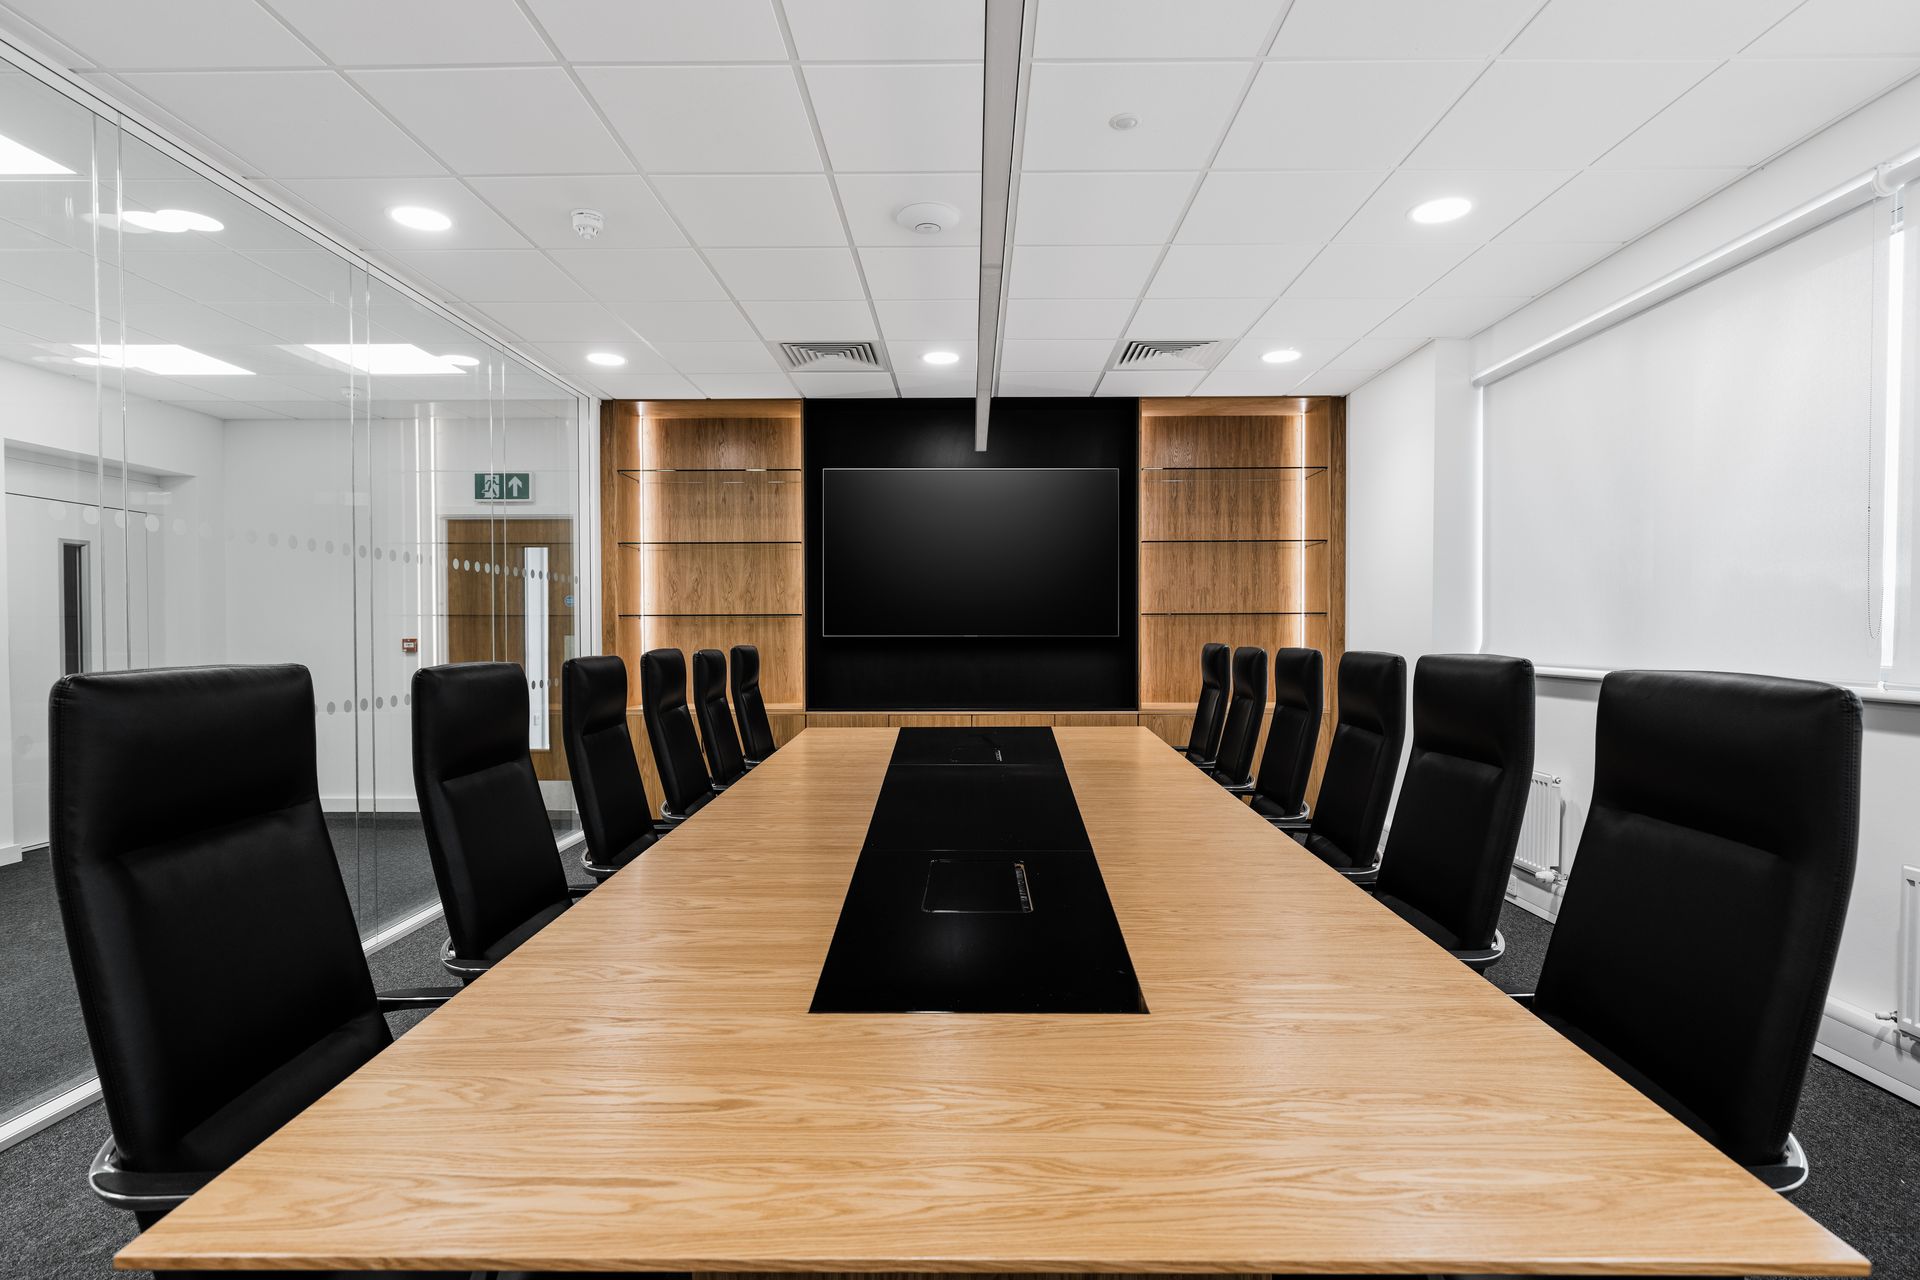 A conference room with a long wooden table and black chairs.